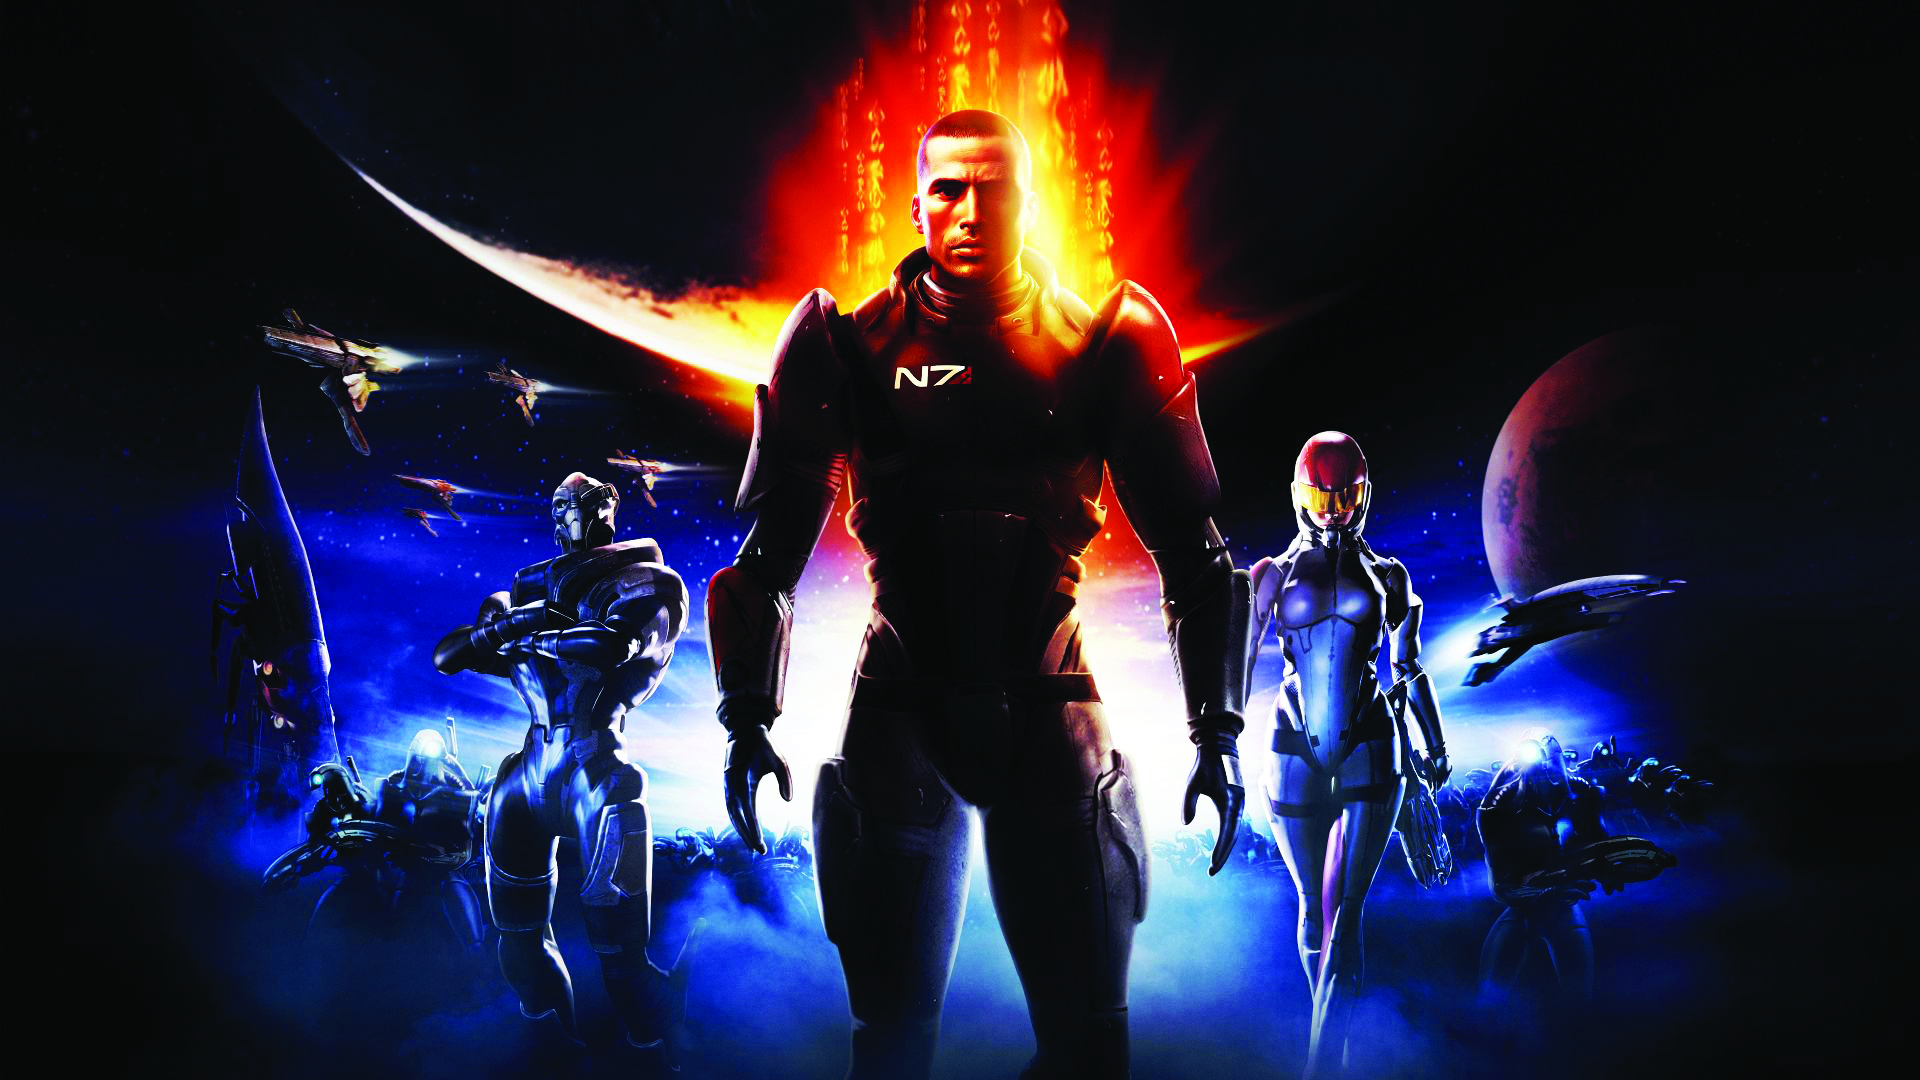 mass effect 2 full game download free